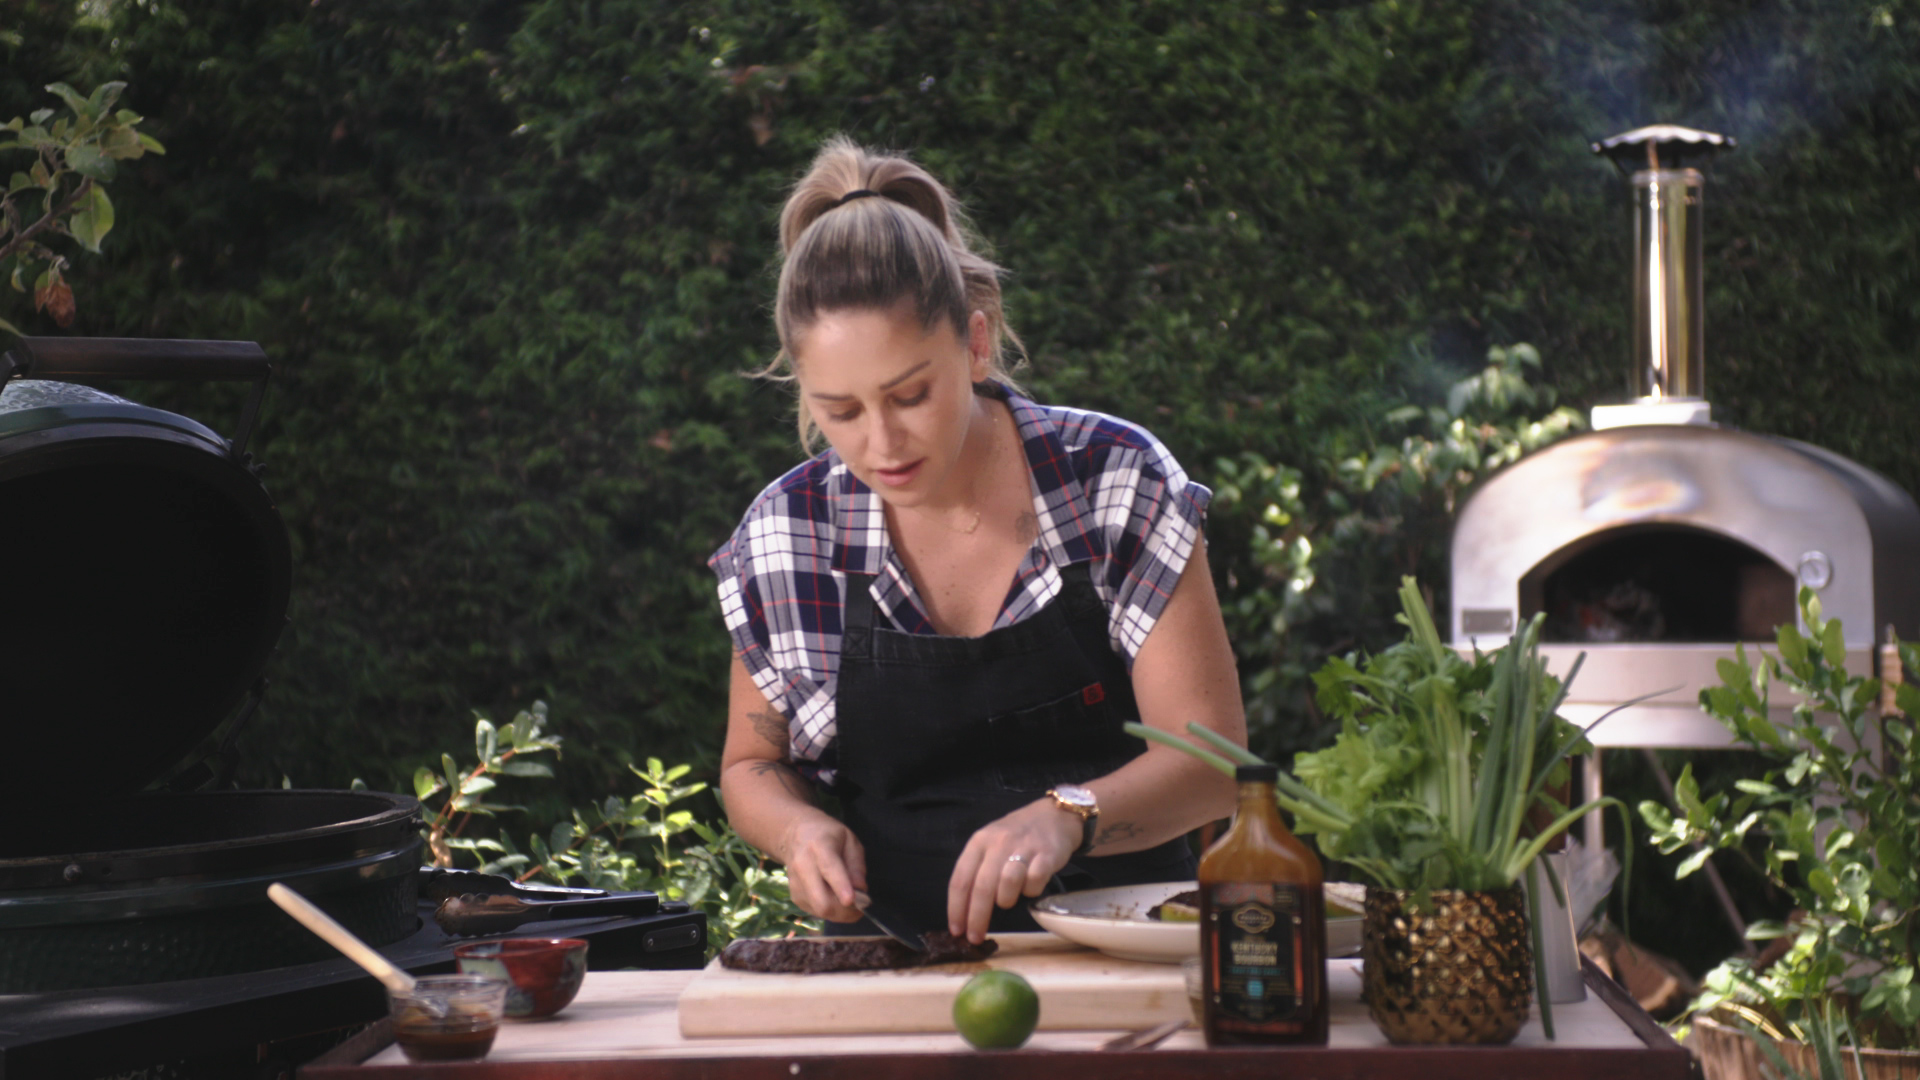 Finding Balance with Chef Brooke Williamson